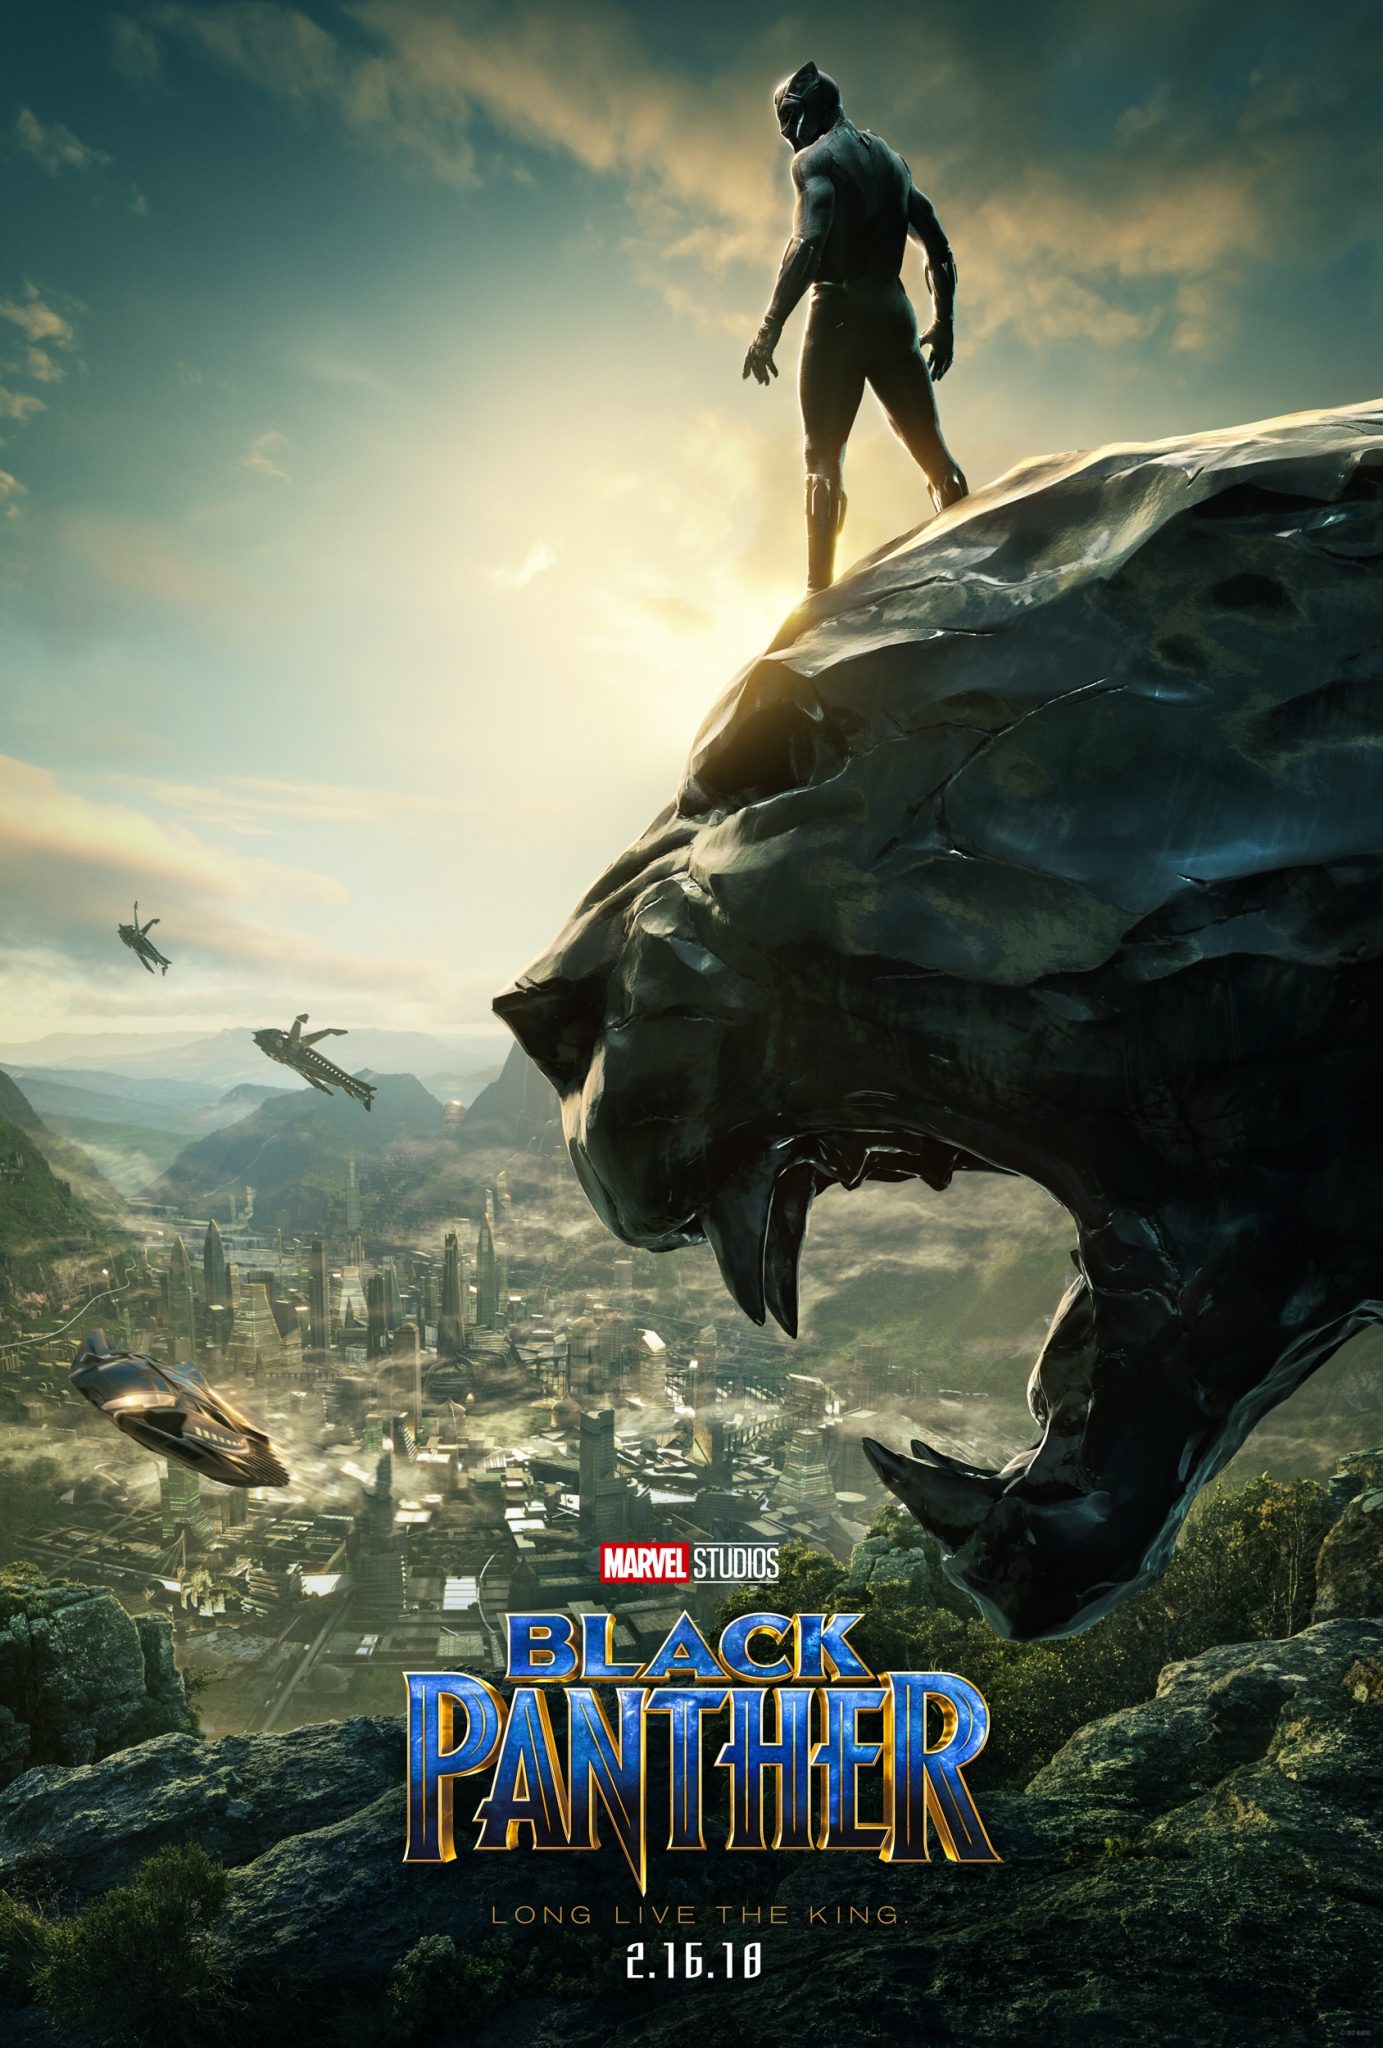 Marvel Reveals Poster for Black Panther at San Diego Comic-Con!